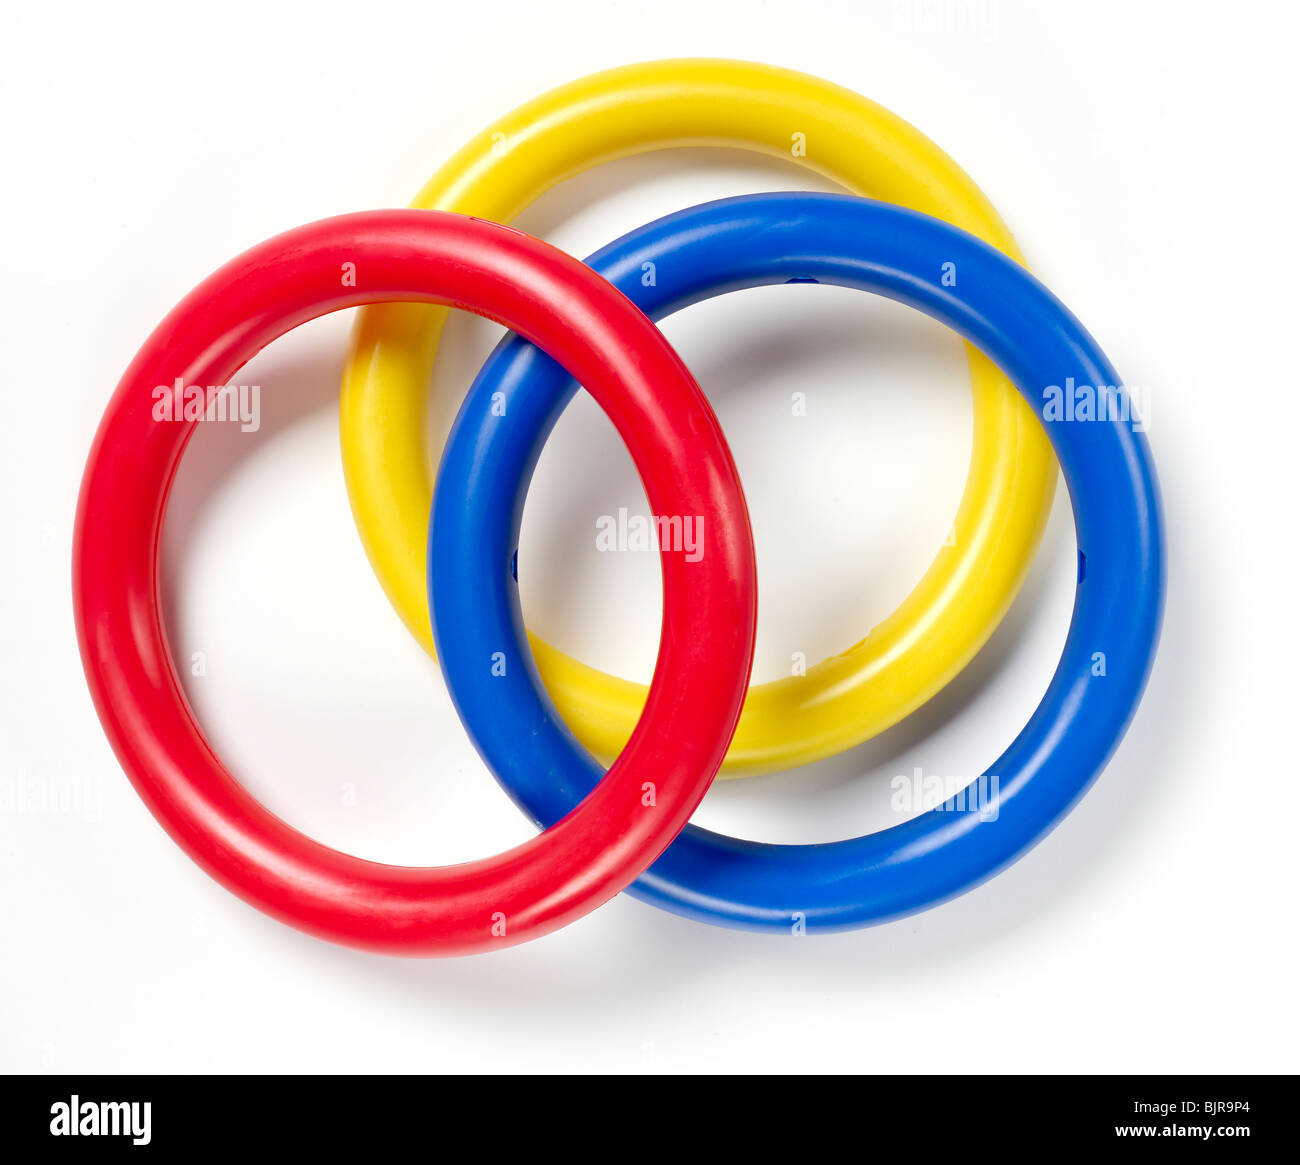 red blue yellow hula hoops Stock Photo